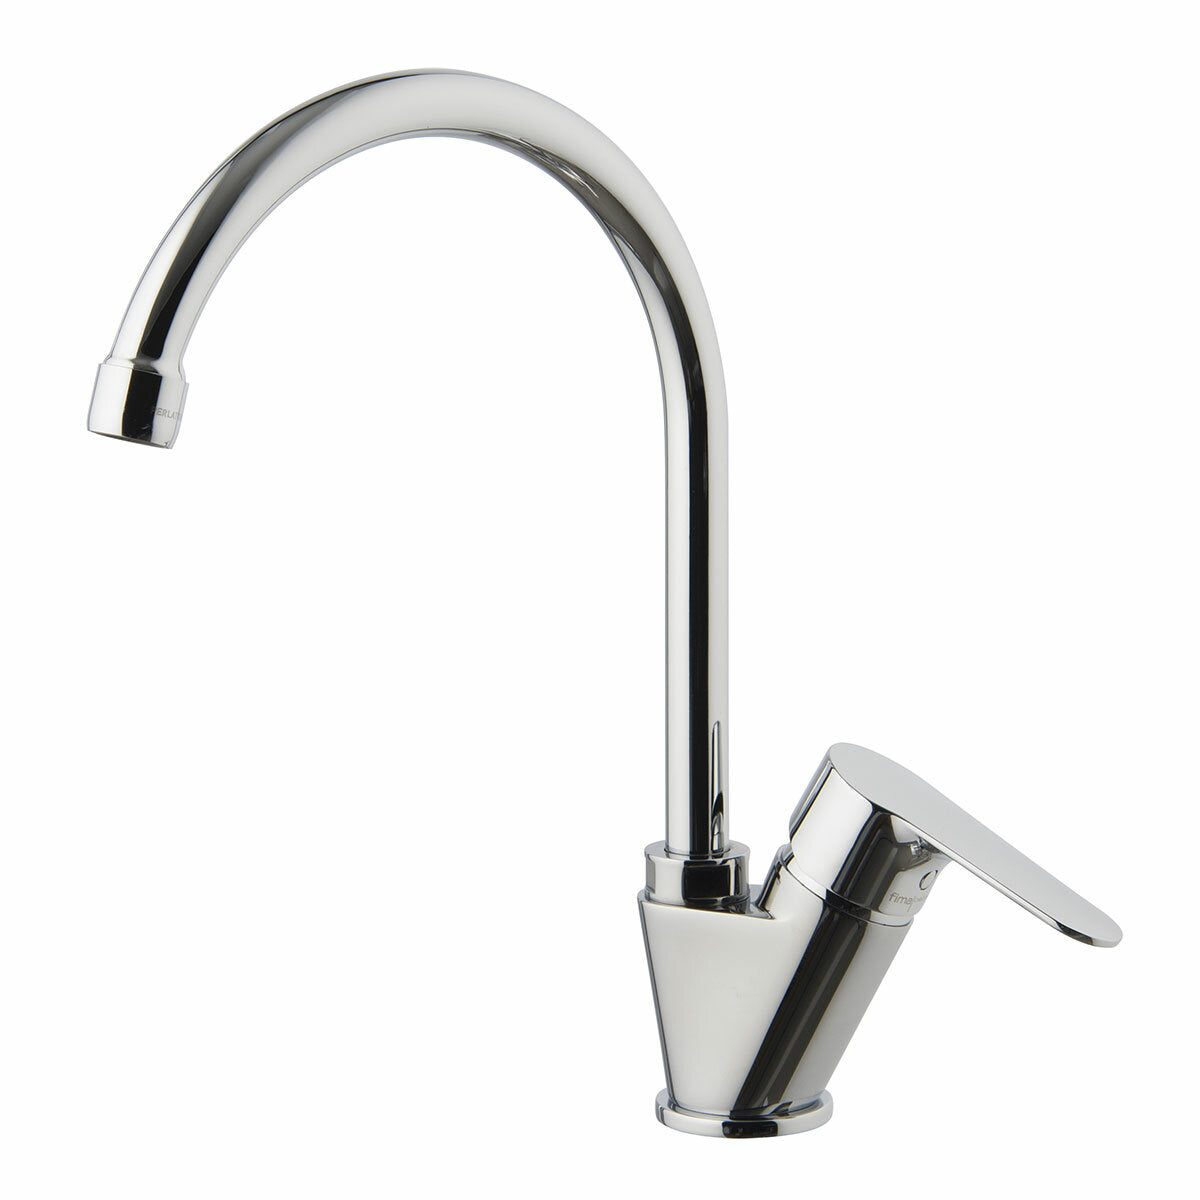 Fima Carlo Frattini Series 22 single-hole sink mixer with round spout and WSC cartridge